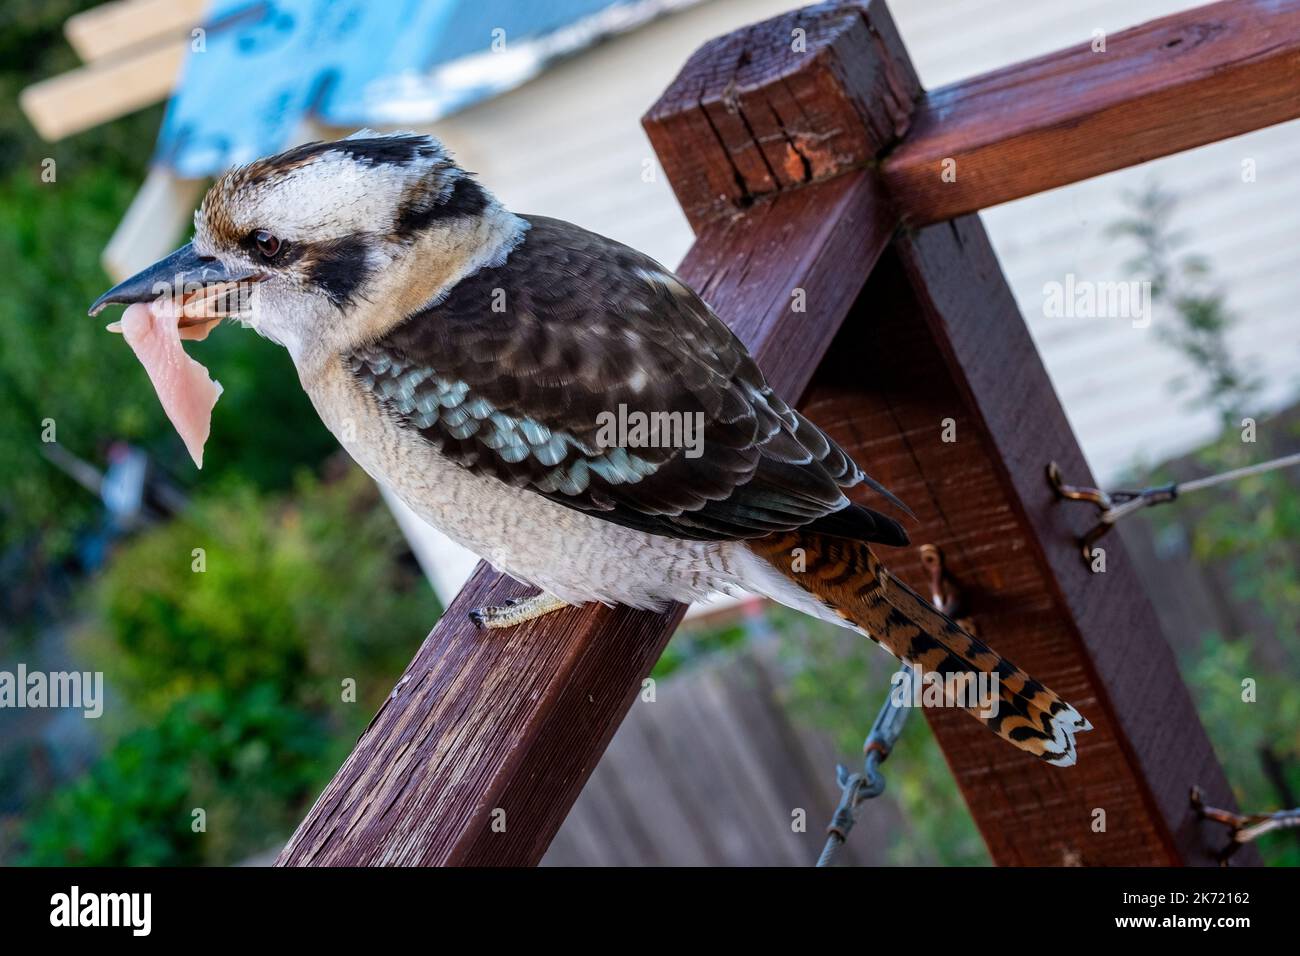 An Australian kookaburra with a piece of chicken meat in its beak. The kookaburra is not native to the island state of Tasmania,  but is an introduced species. Stock Photo